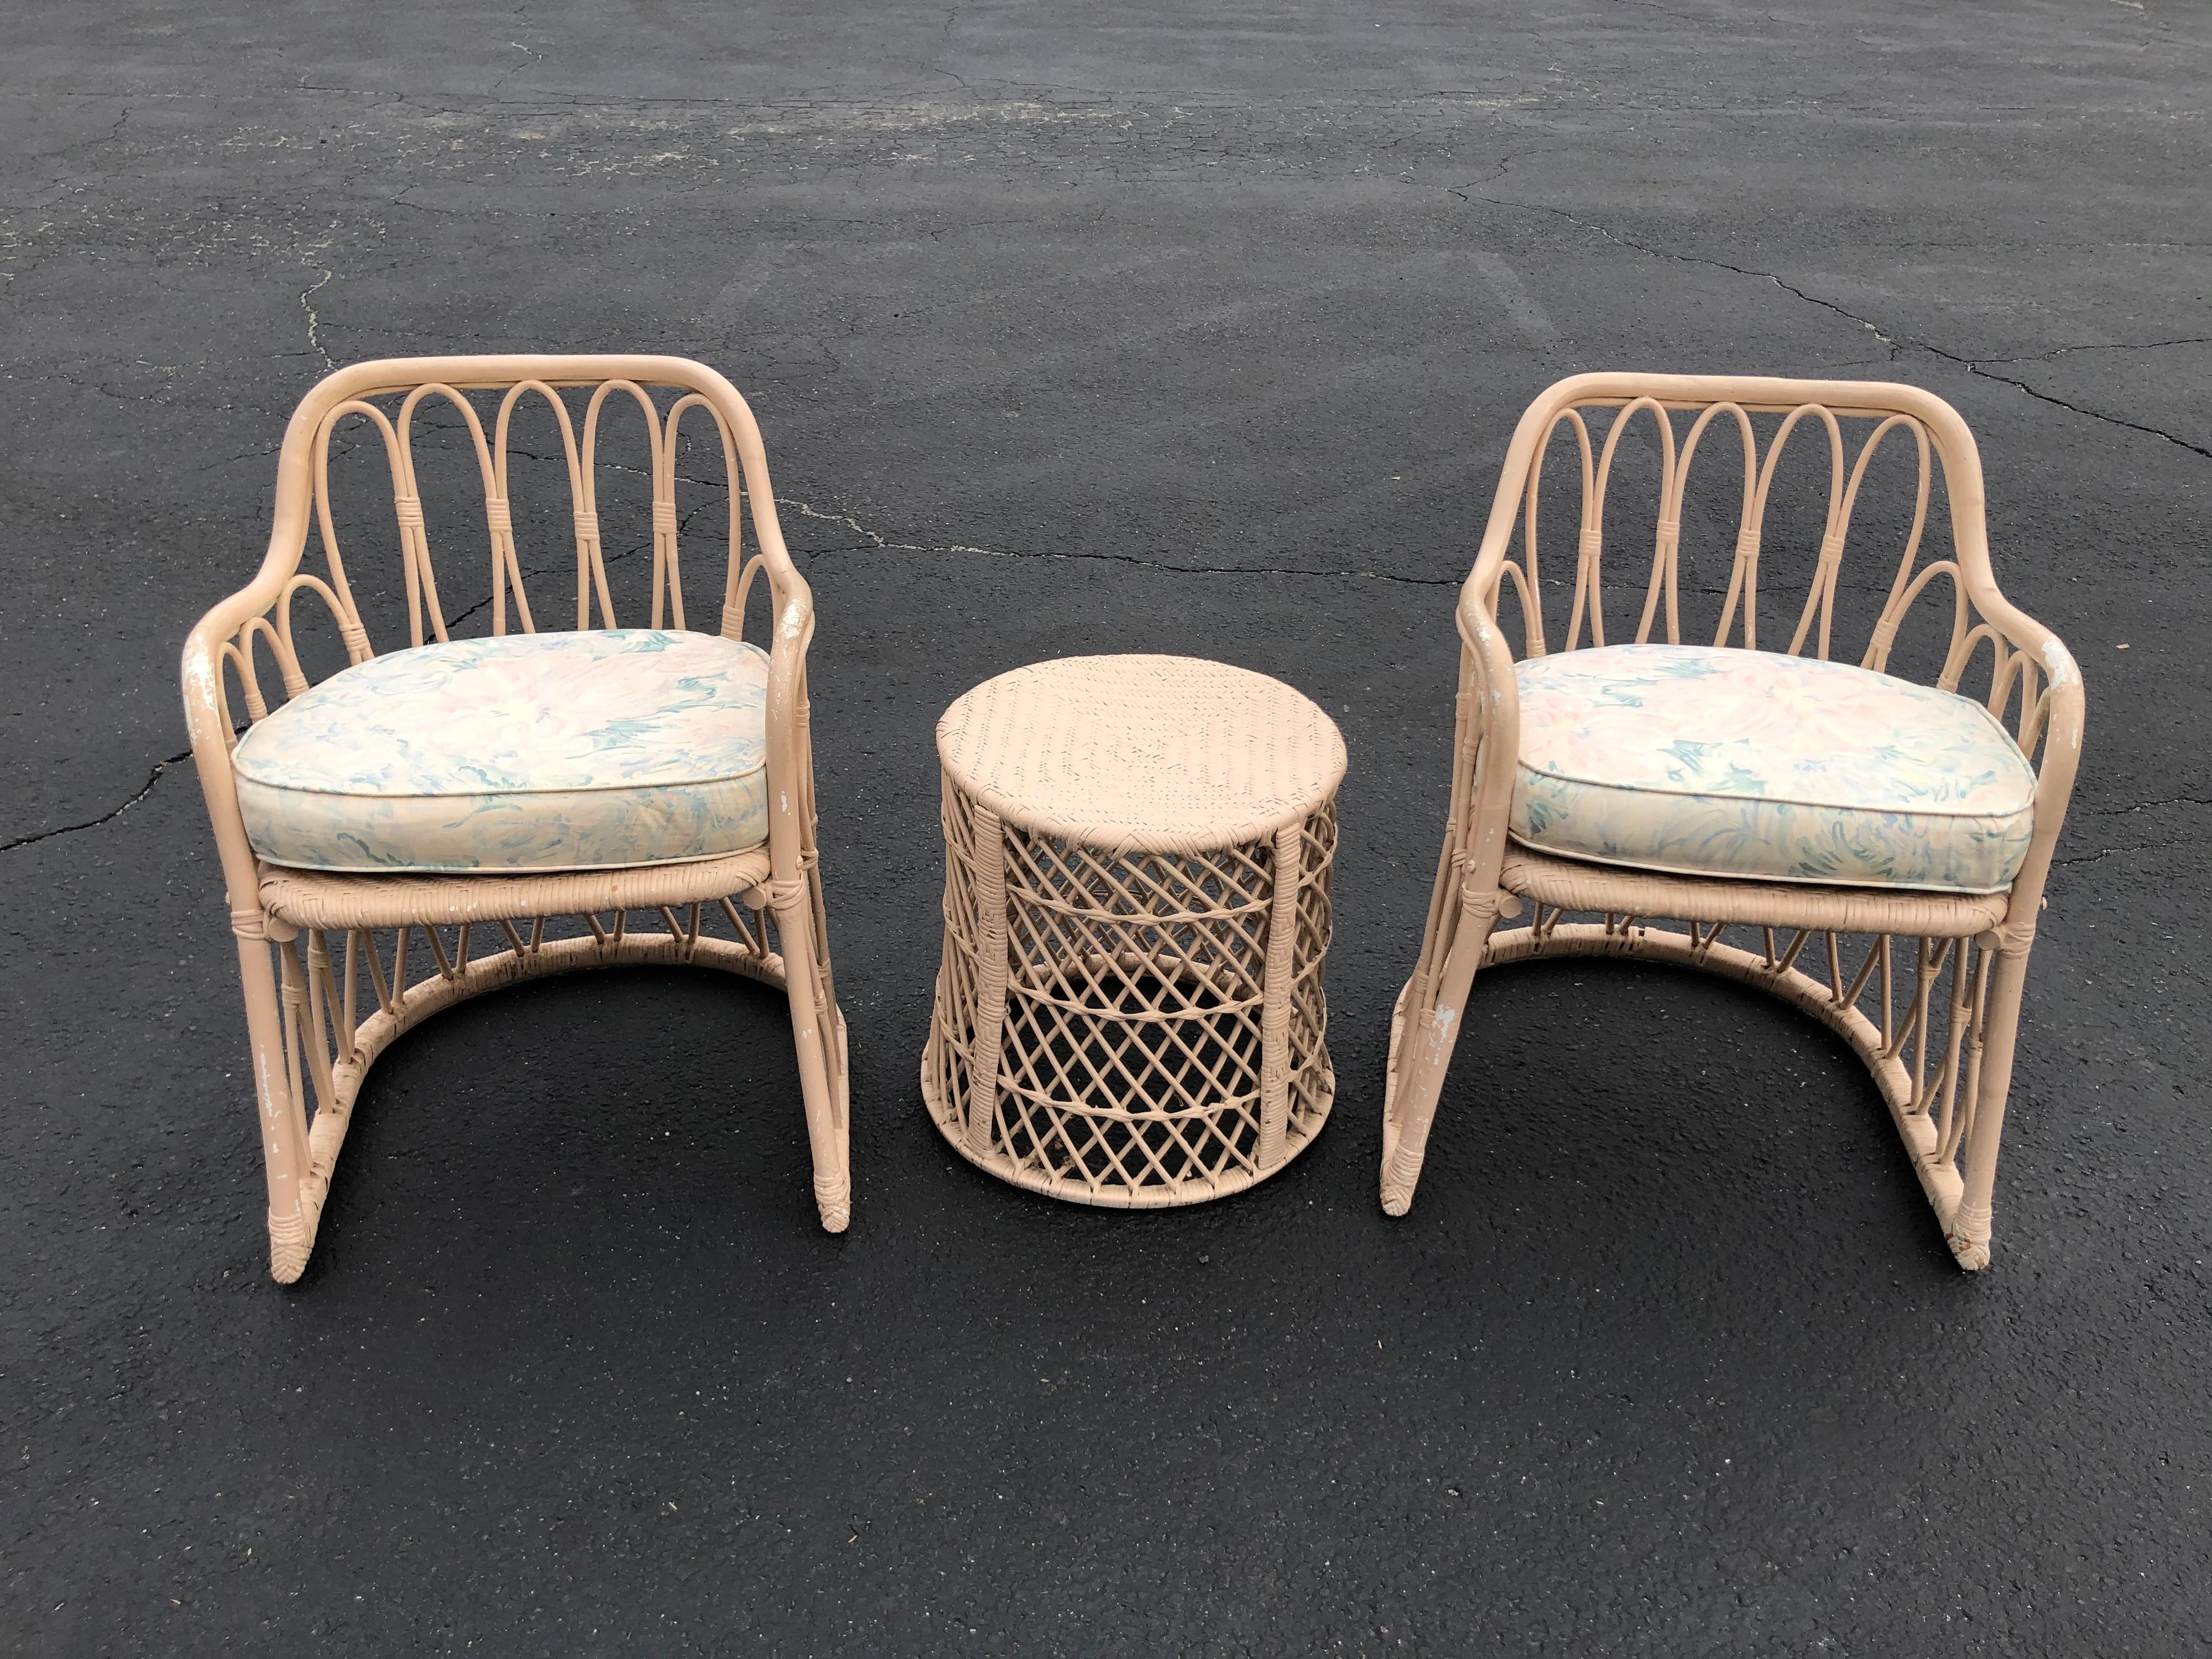 Pair of Mid Century wicker chairs with matching table. Painted a soft pink mauve. Can be resprayed any color.Perfect for an indoor porch. Comes with custom made floral cushions. Fabulous boho chic style.
Table width is 16.75